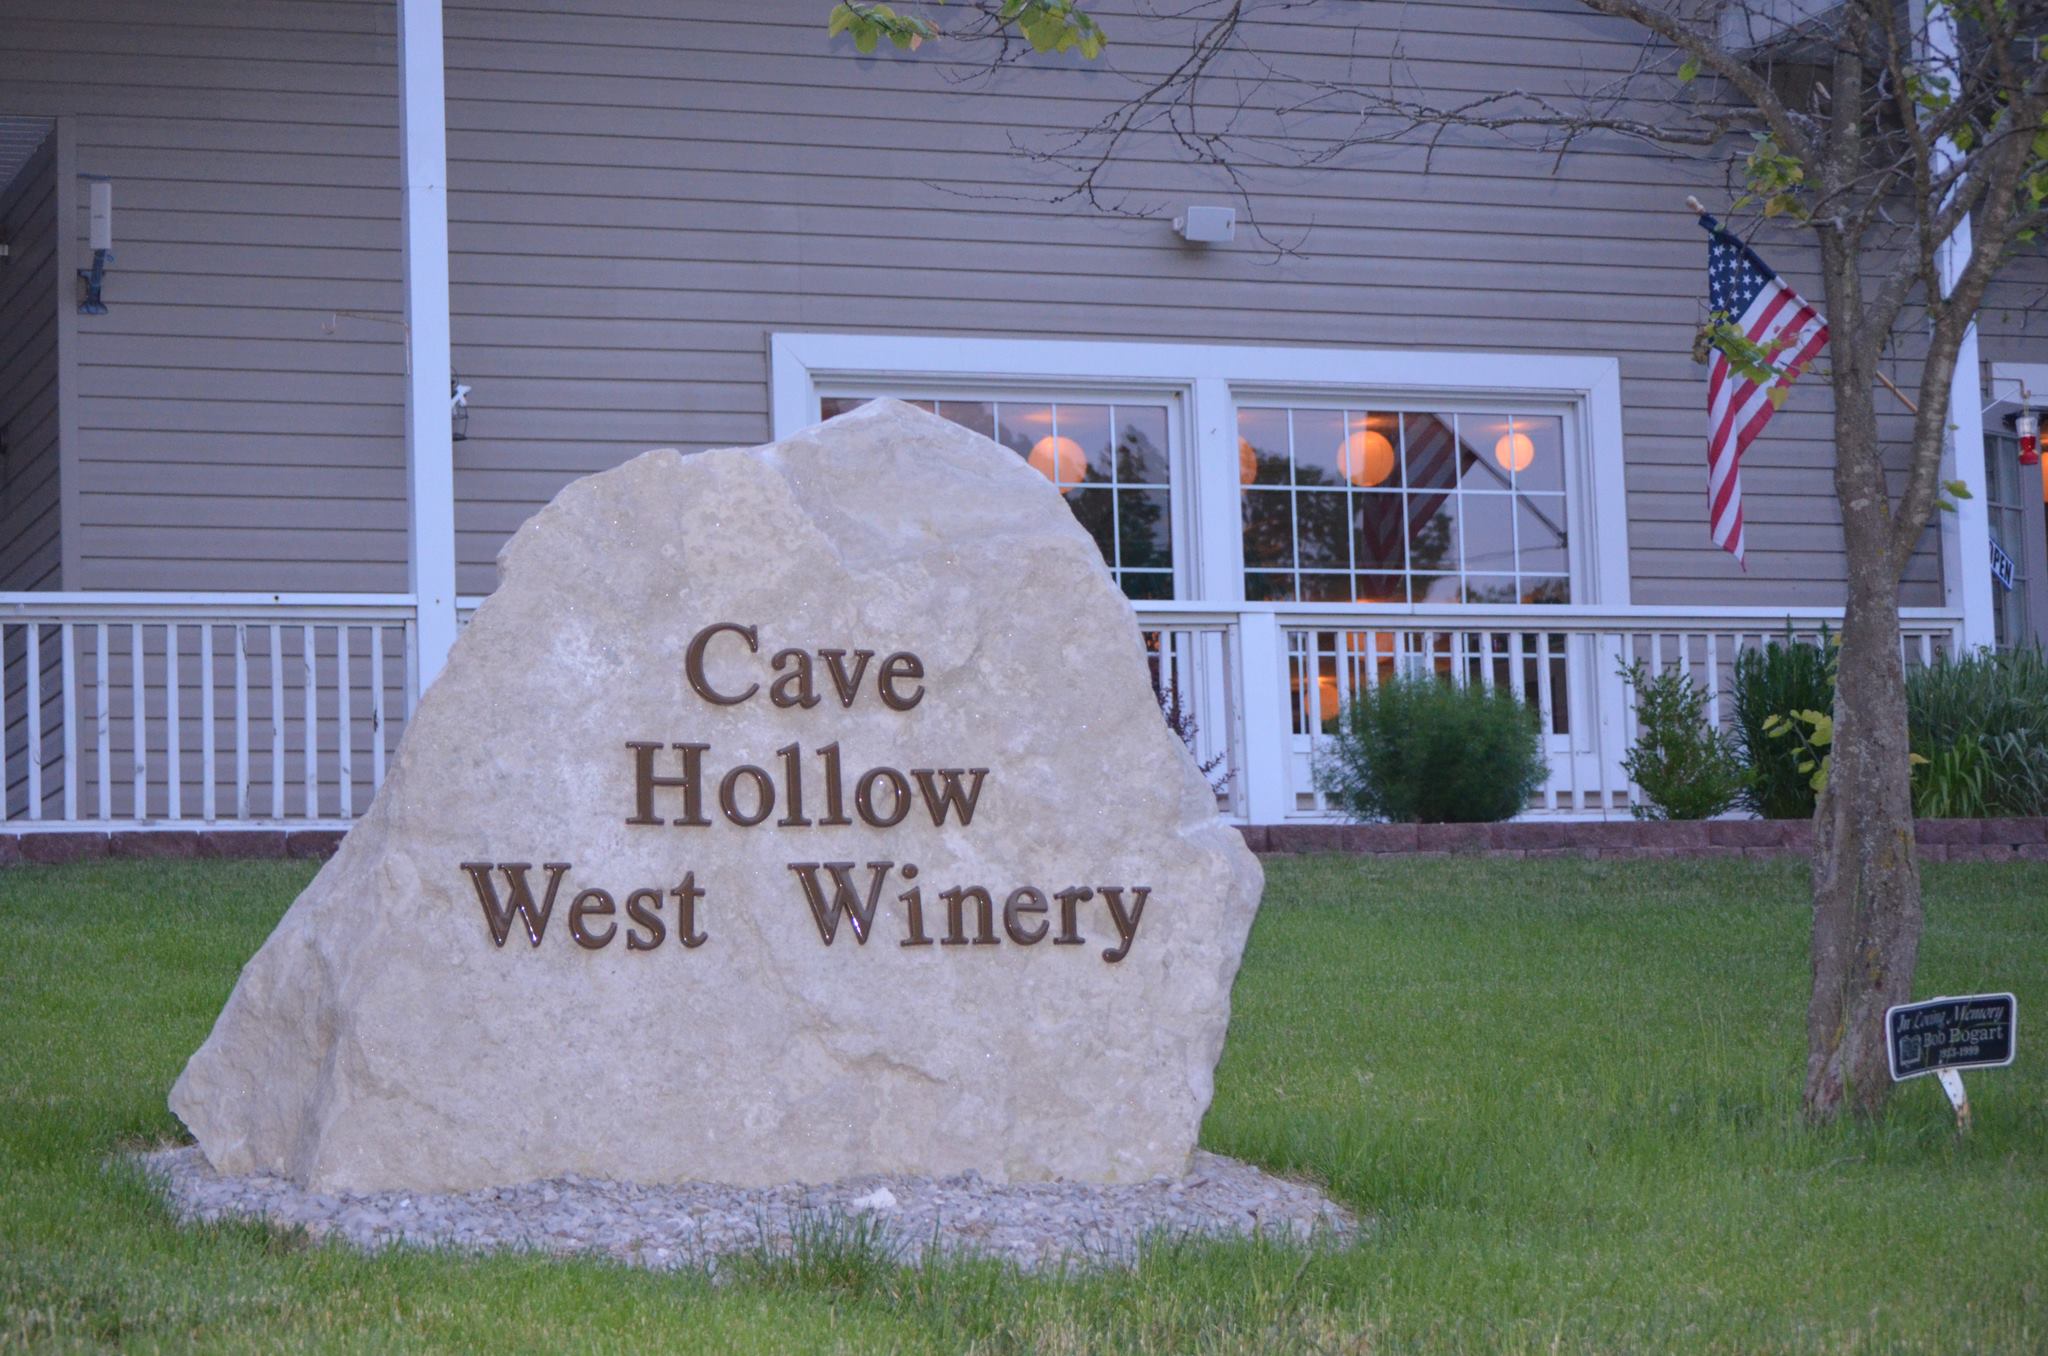 Cave Hollow West Winery- Sign to the winery that reads "Cave Hollow West Winery".